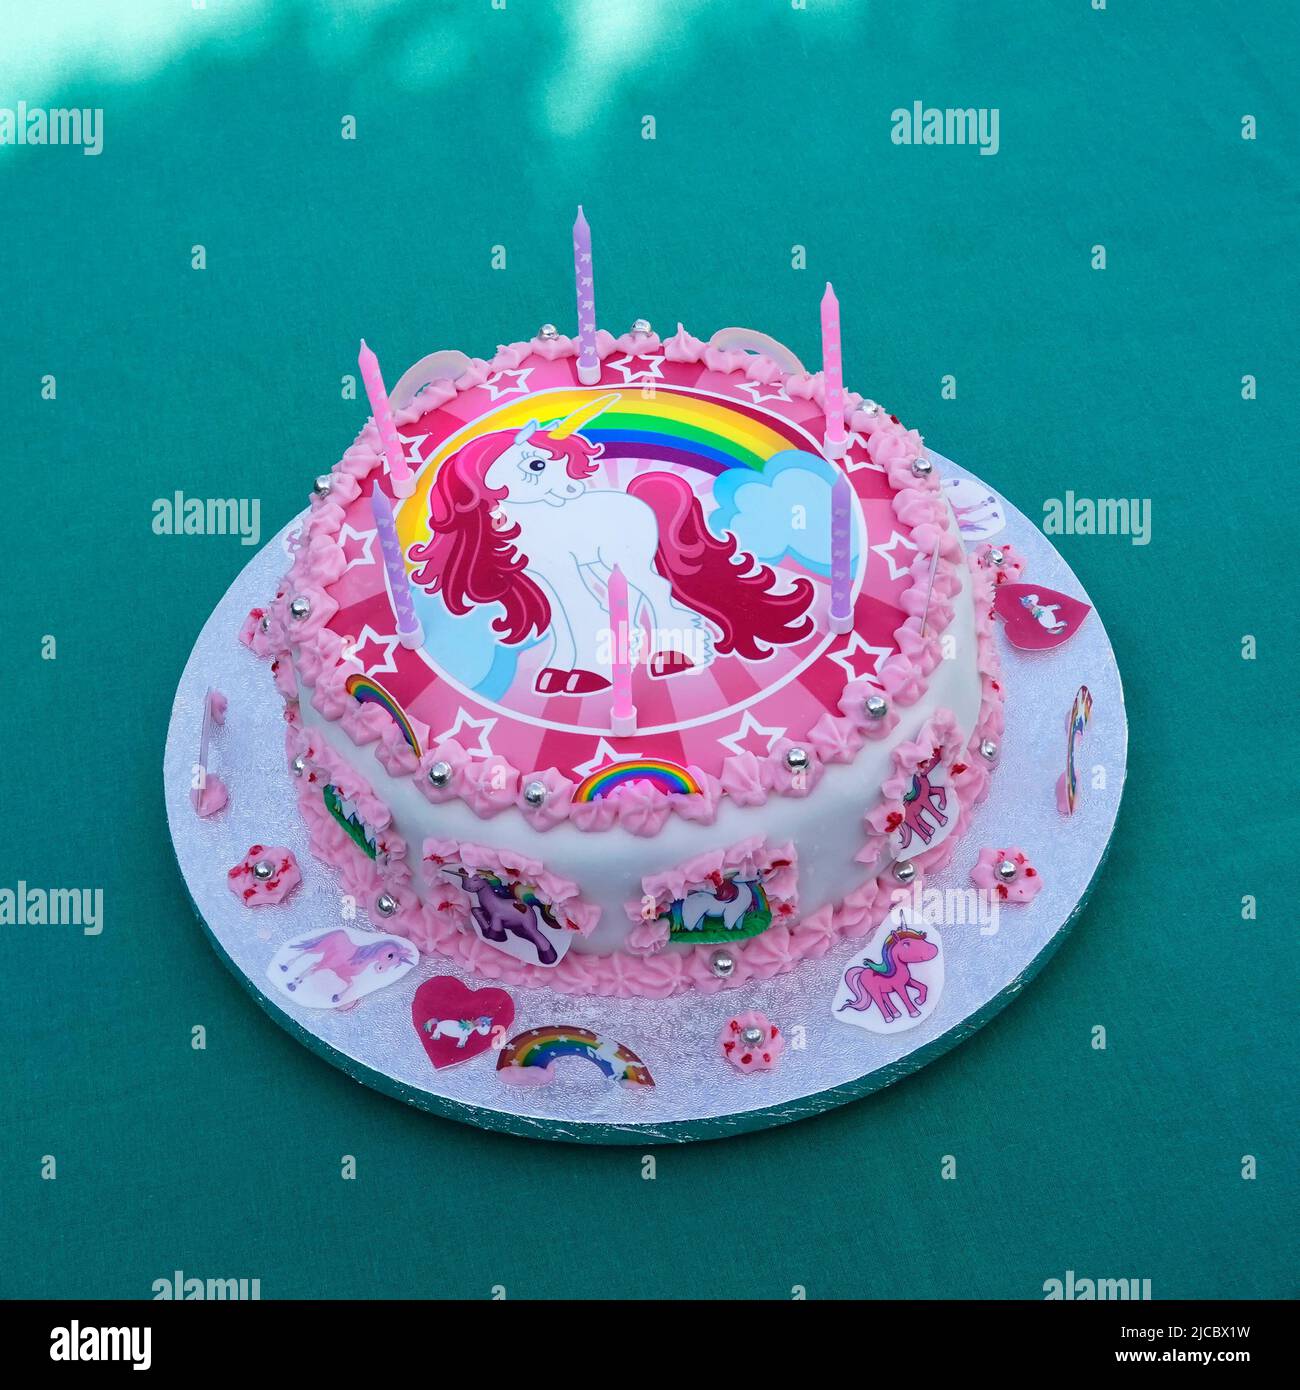 Homemade six year old girls birthday cake with unicorn theme decorated with rainbows stars hearts candles pink and white icing on silver cake board UK Stock Photo